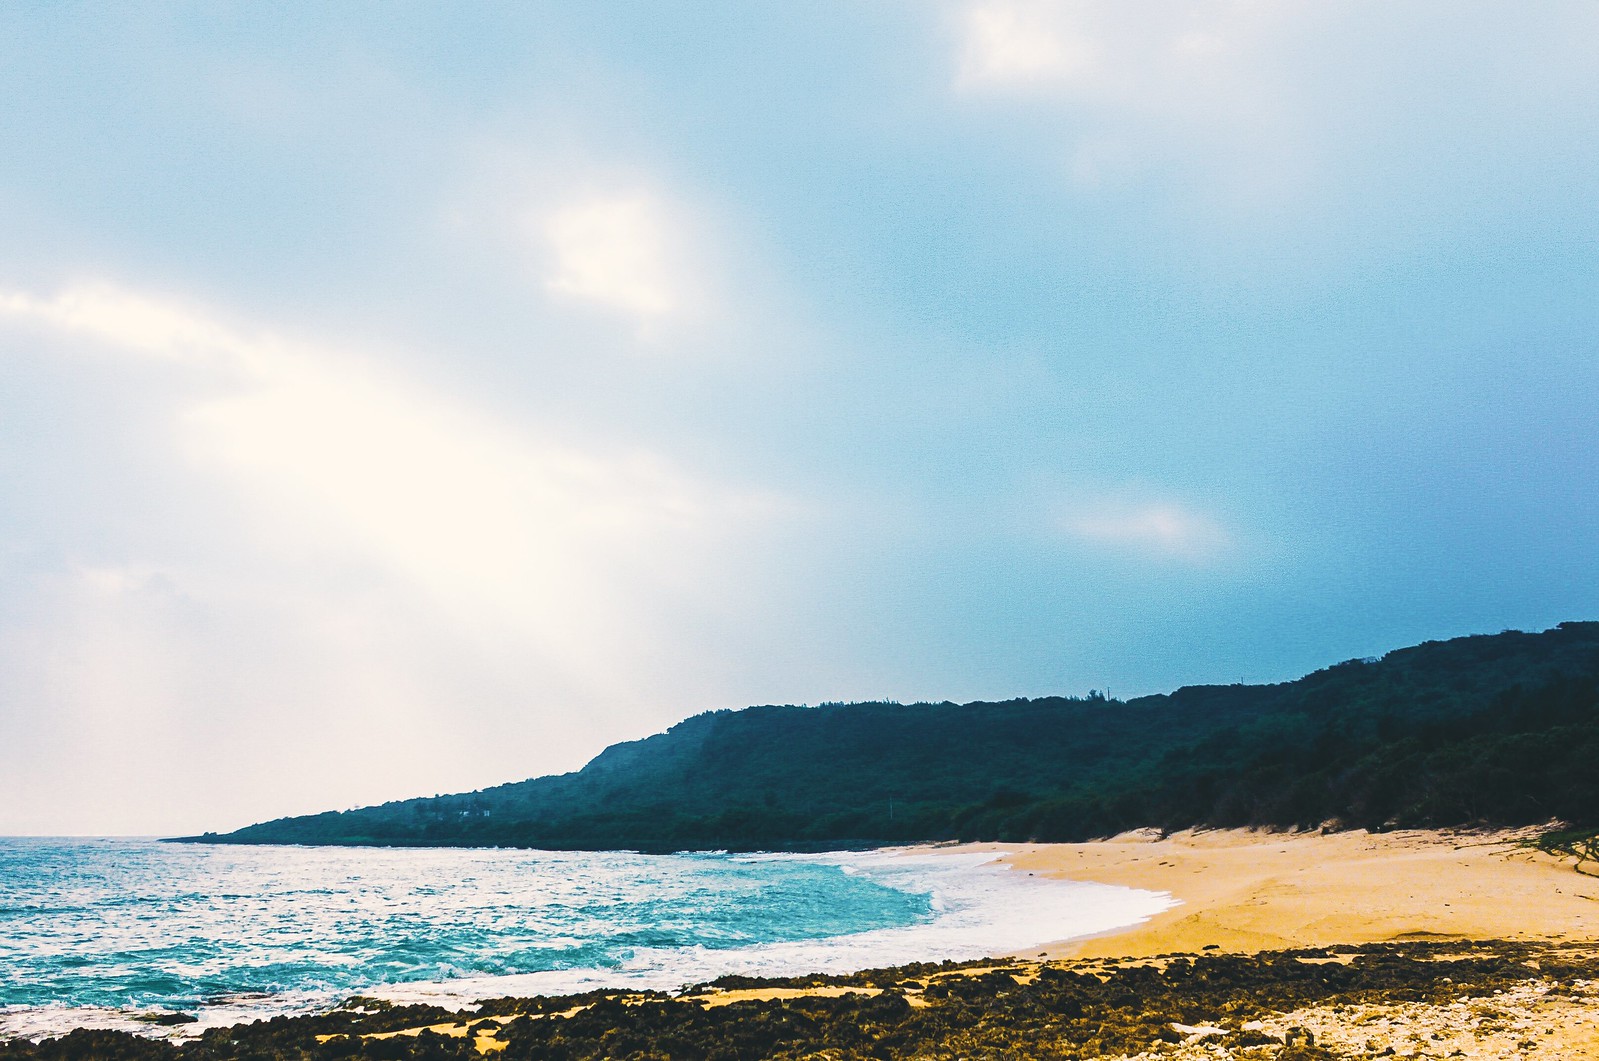 Kenting is one of the most popular beaches in Taiwan